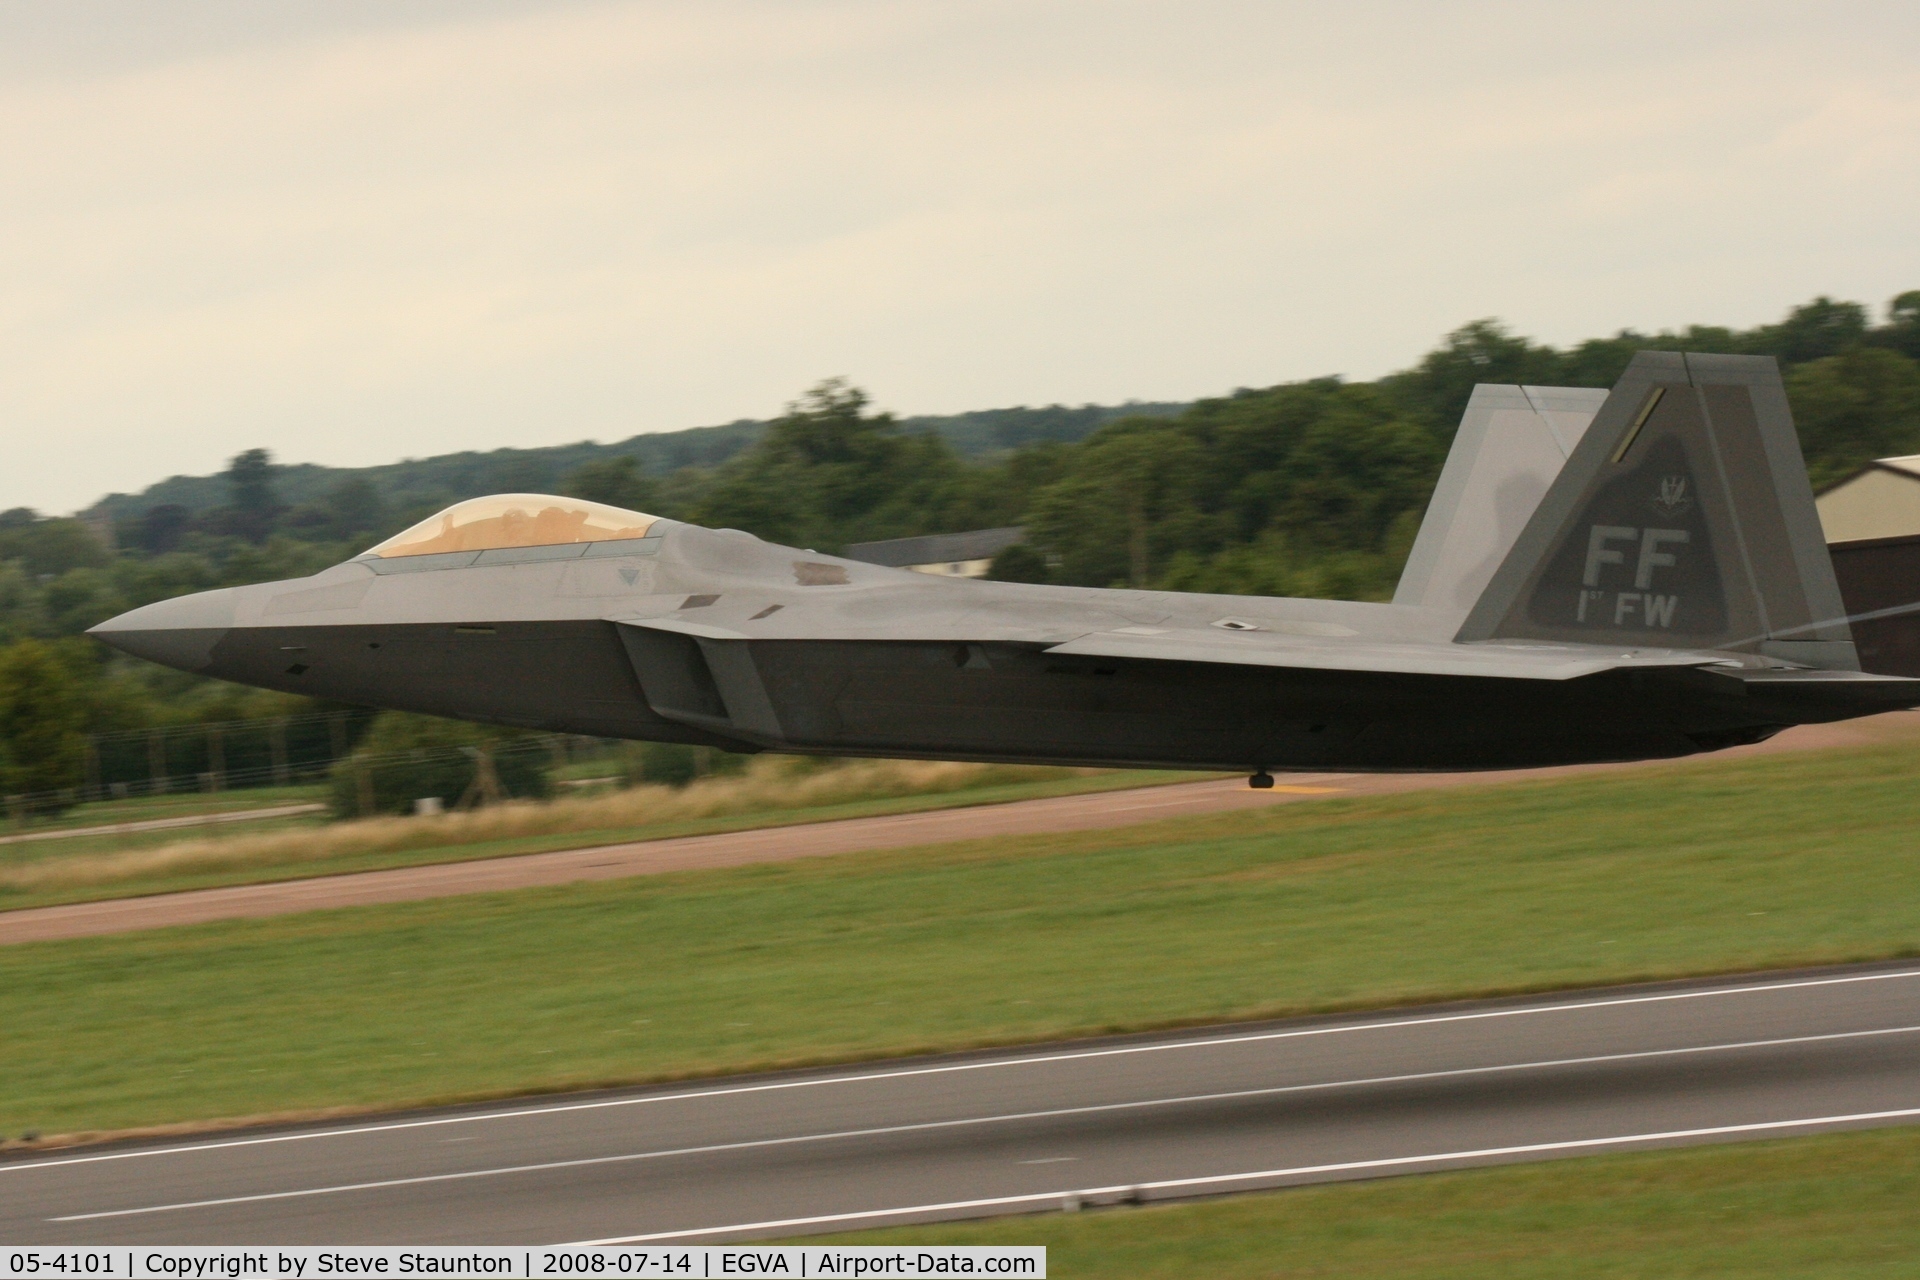 05-4101, 2003 Lockheed Martin F-22A Raptor C/N 645-4101, Taken at the Royal International Air Tattoo 2008 during arrivals and departures (show days cancelled due to bad weather)